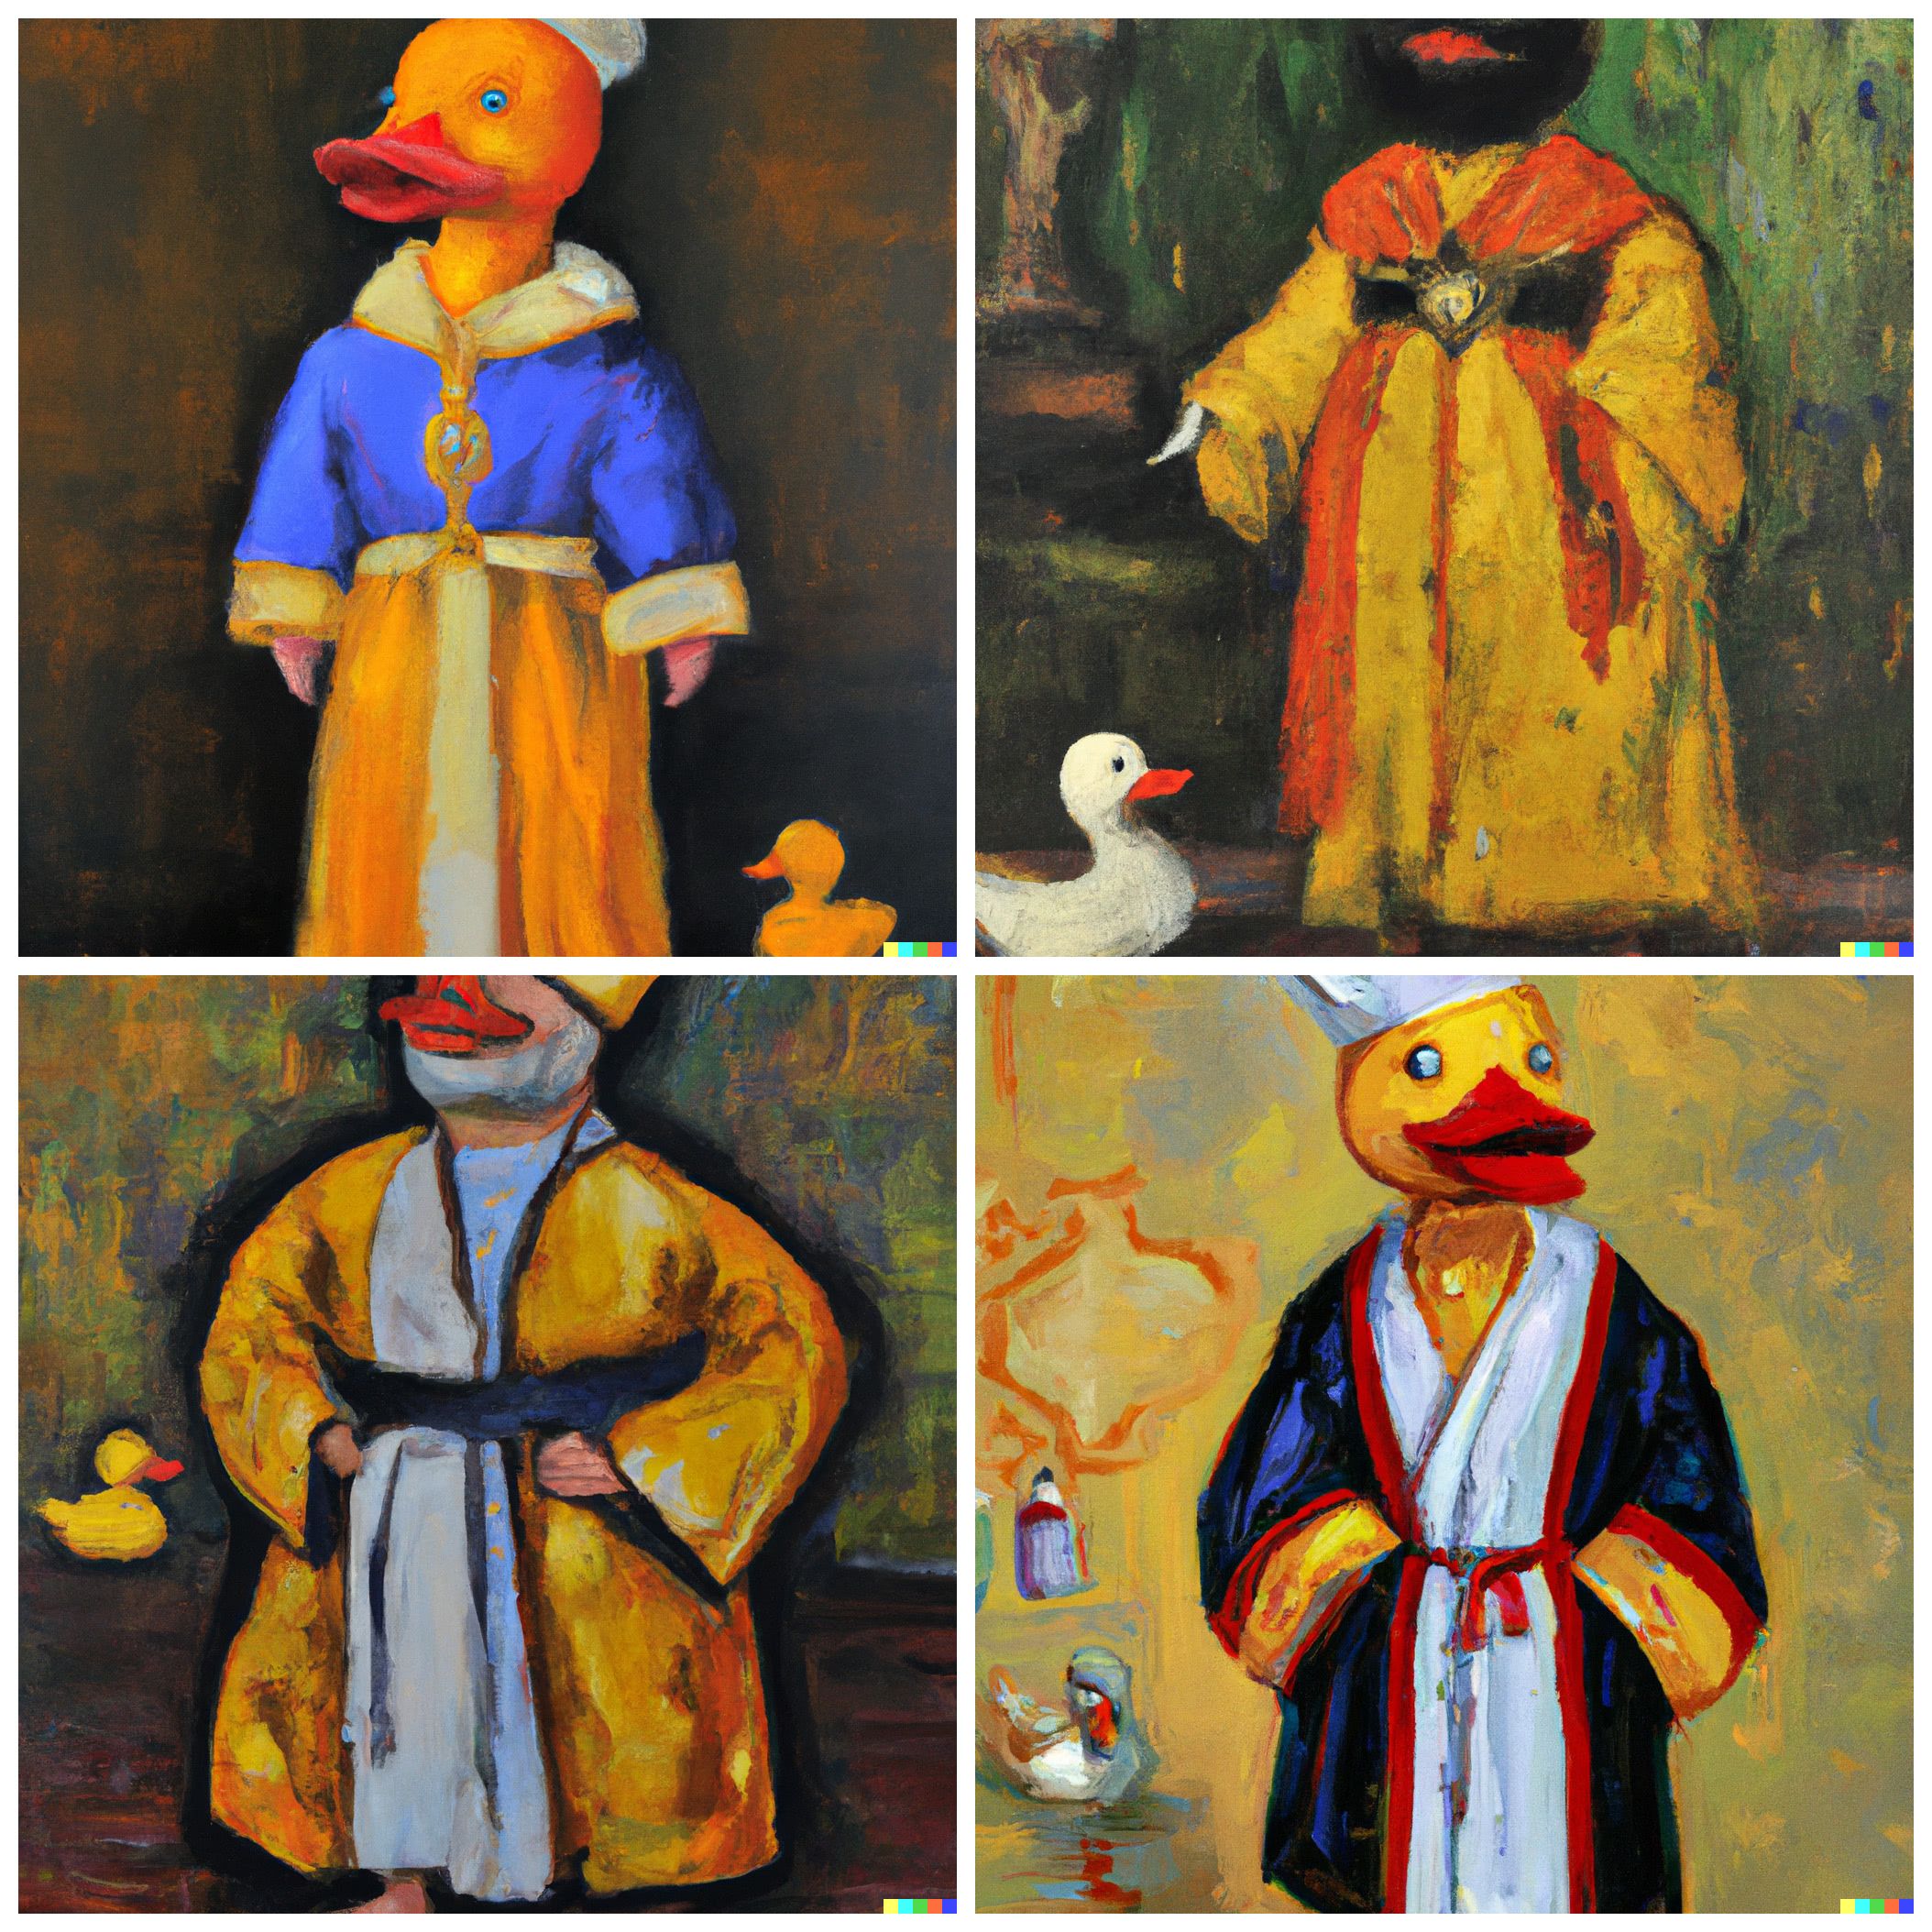 An oil painting of a rubber duck wearing medieval robe by M. F. Hussain